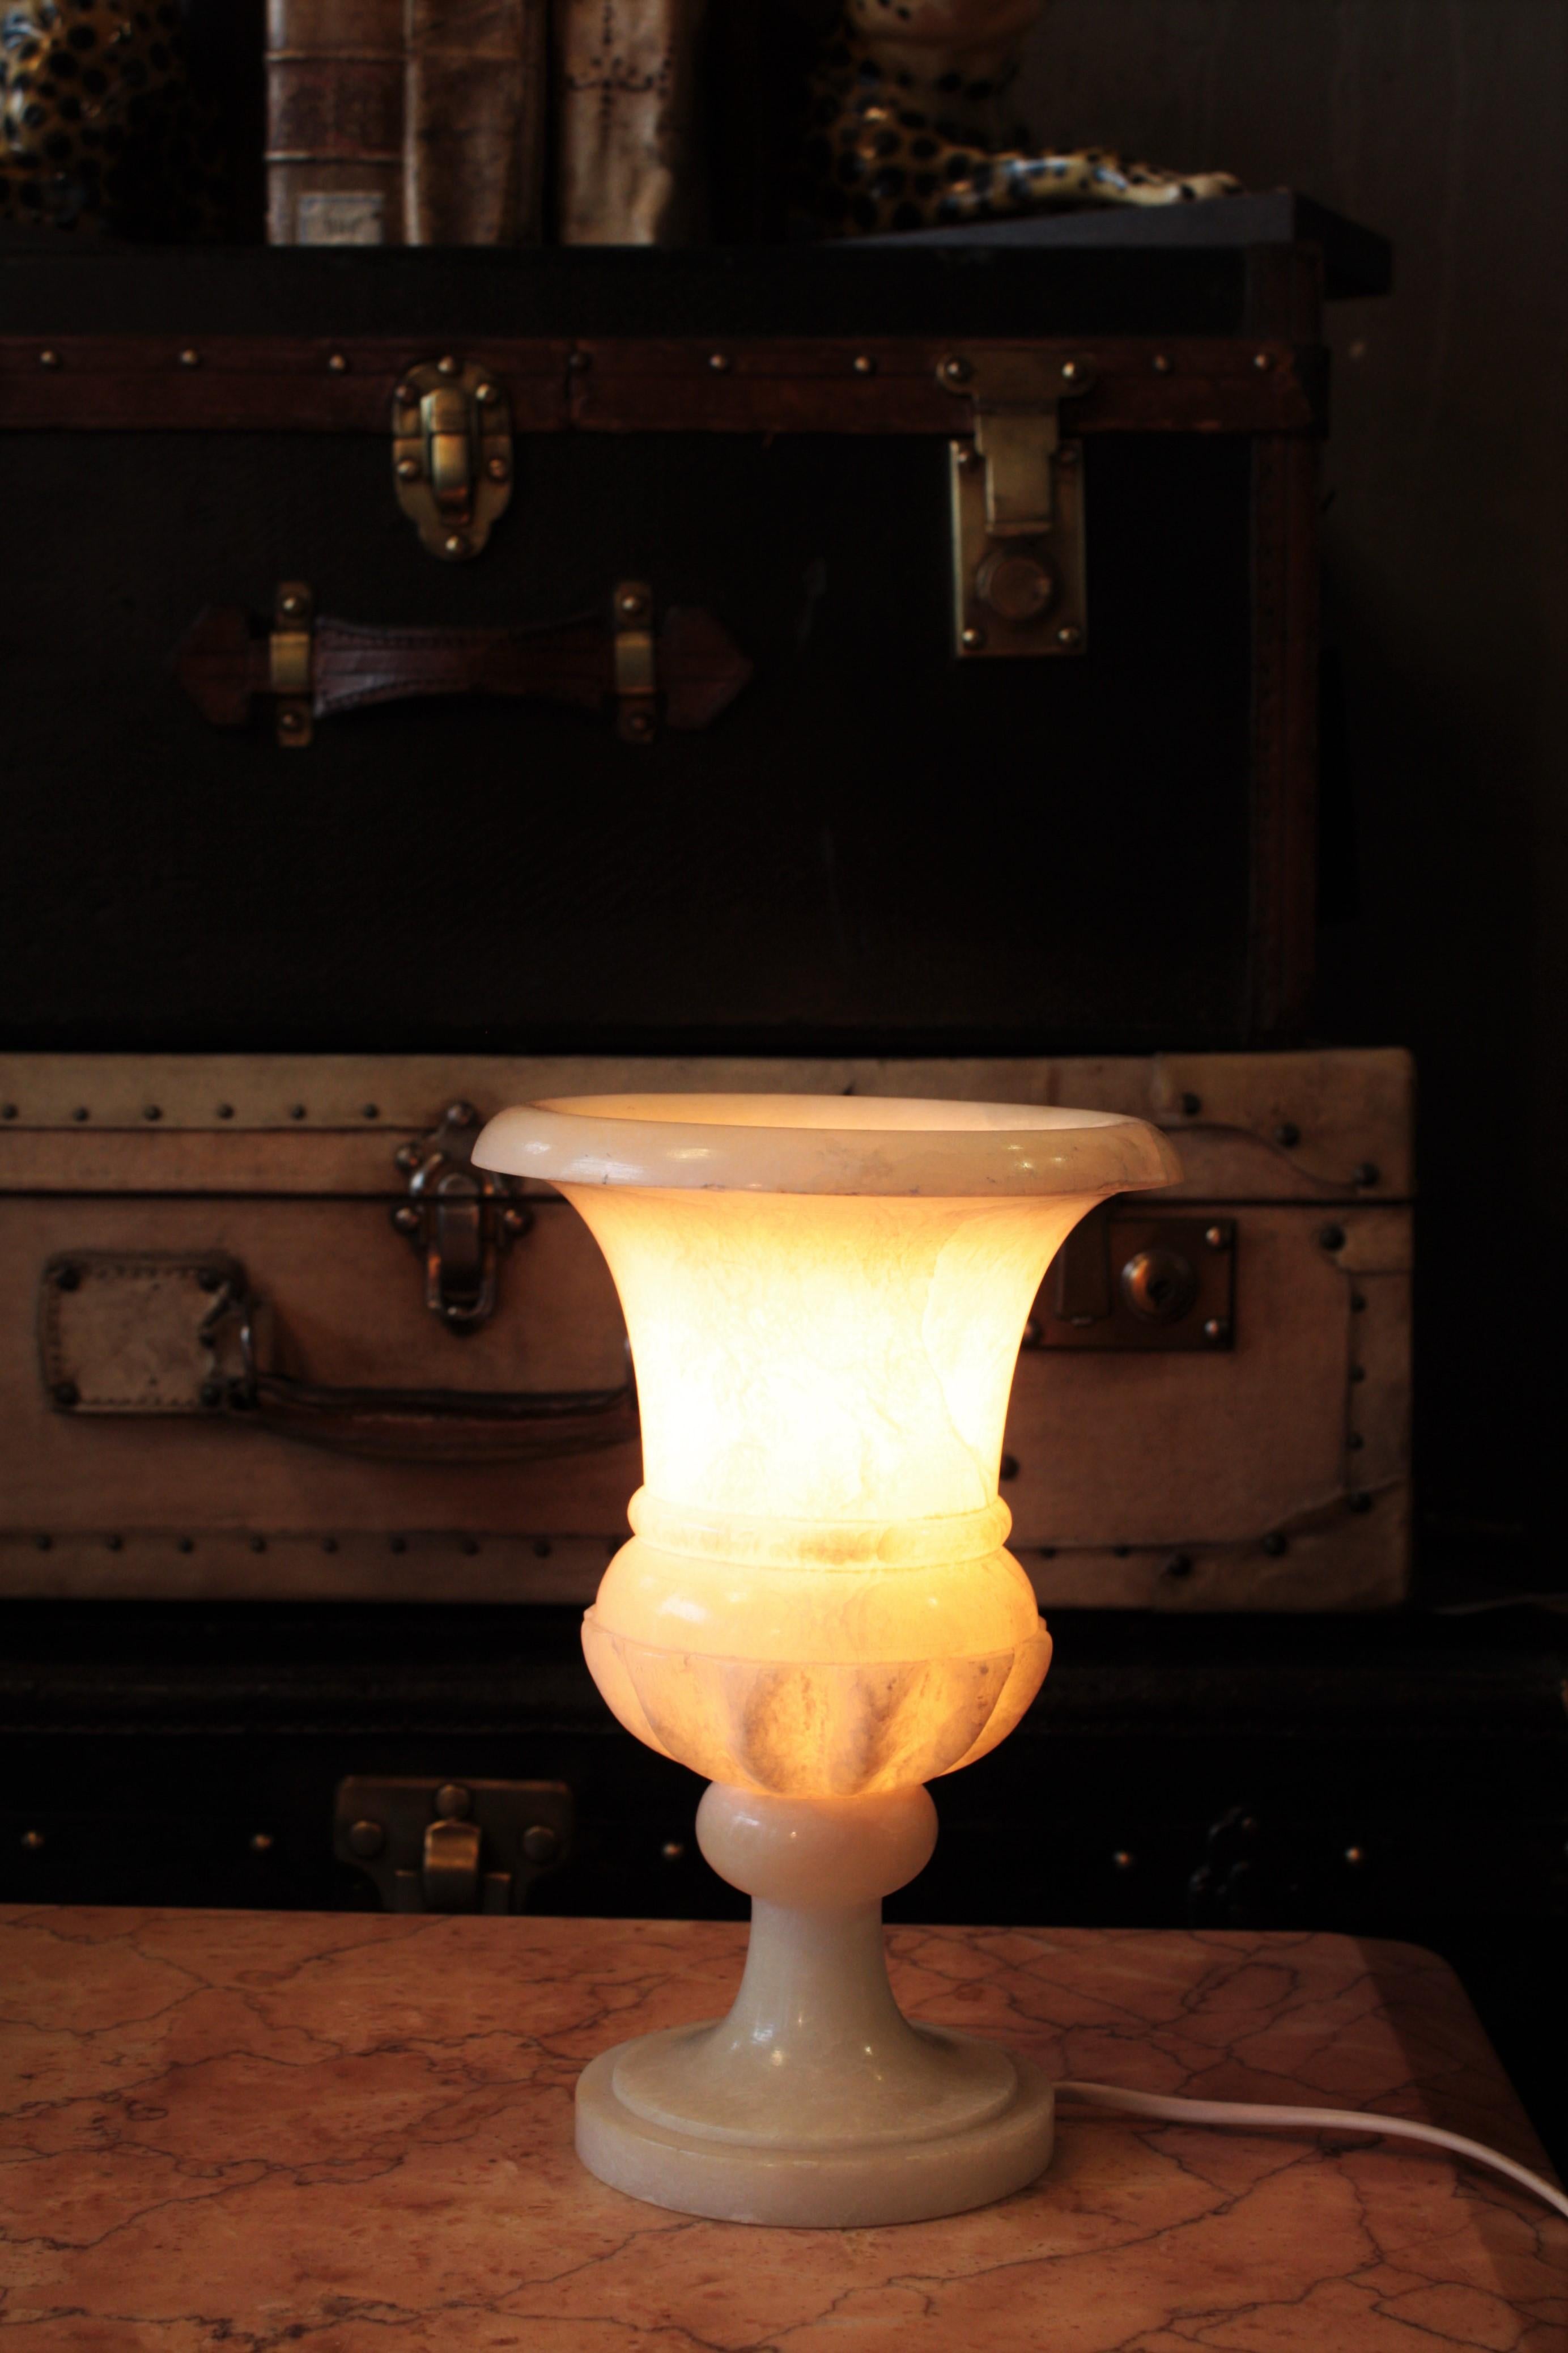 Charming Art Deco period neoclassical style alabaster small urn table lamp. Spain, 1930s.
Elegant and classical design and highly decorative effect when lit.
Lovely placed alone or with other alabaster urn table lamps creating a charming light